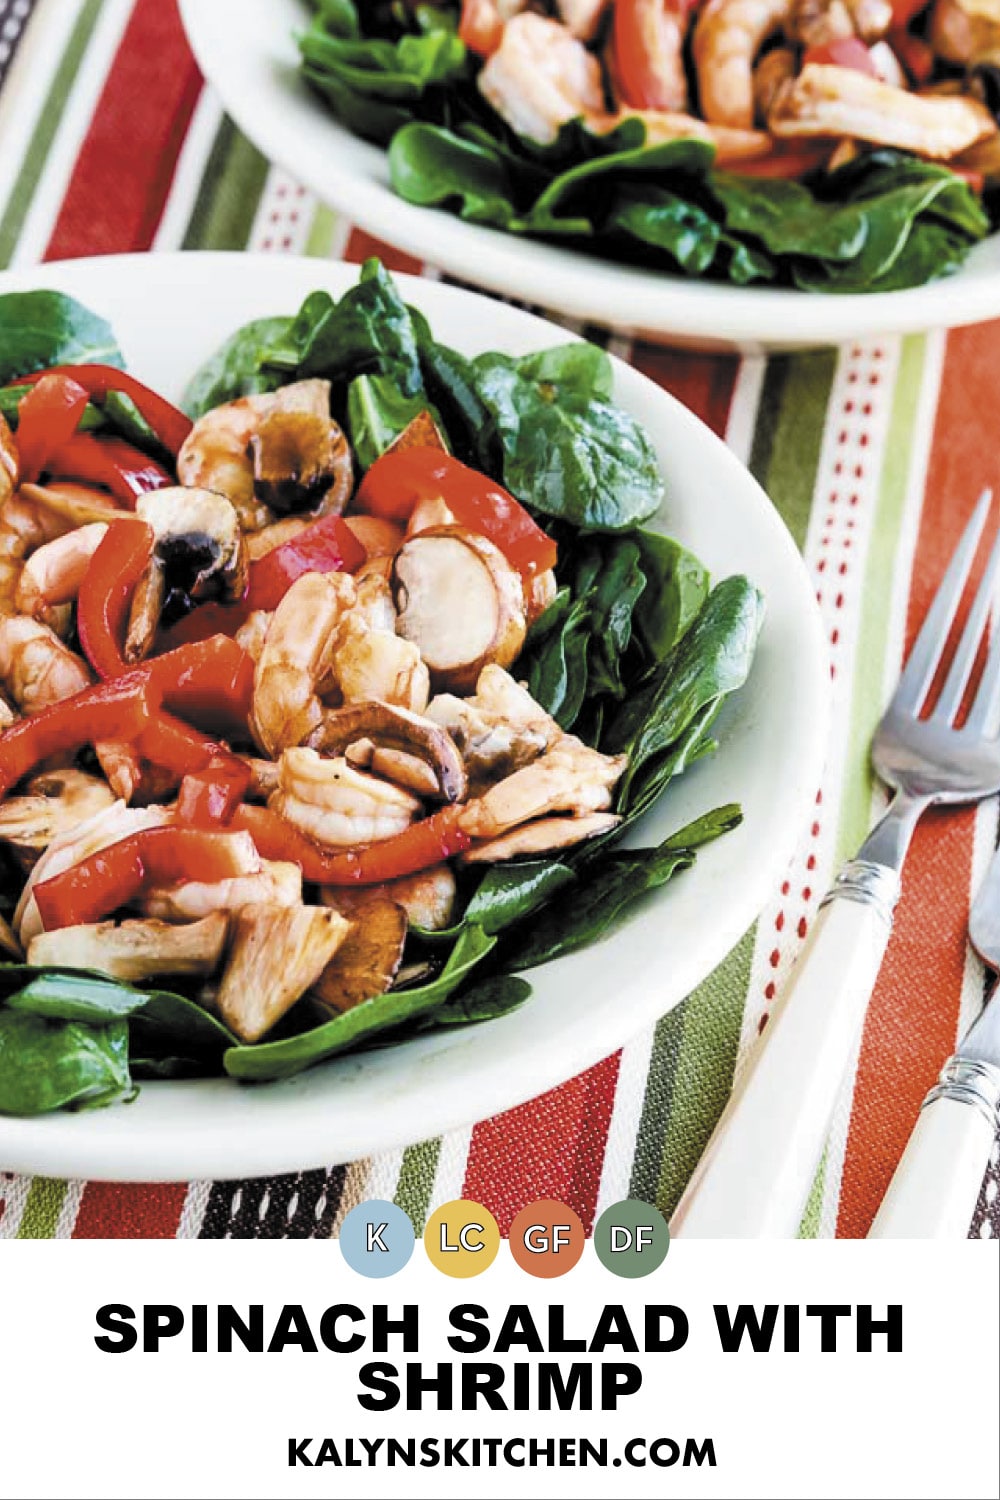 Pinterest image of Spinach Salad with Shrimp